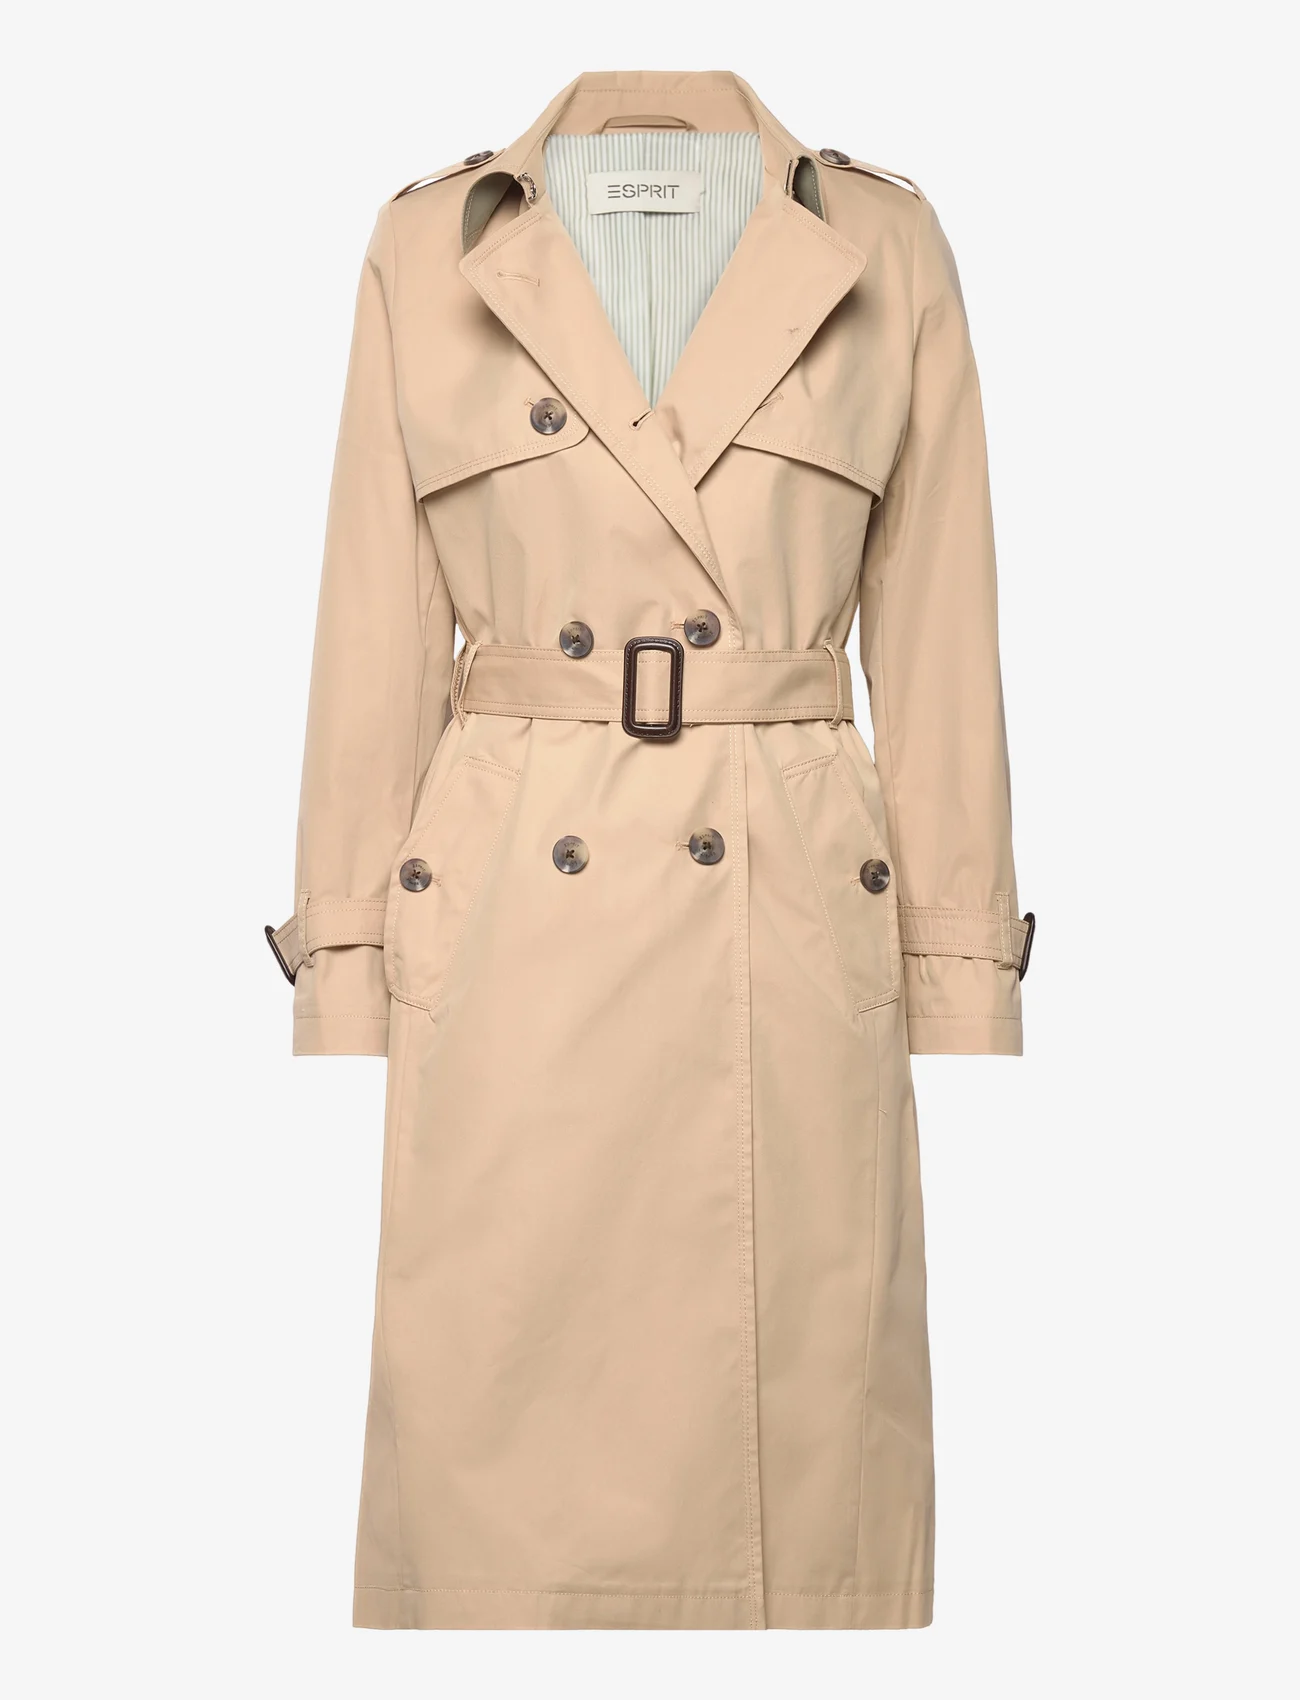 Esprit Casual - Double-breasted trench coat with belt - sand - 1